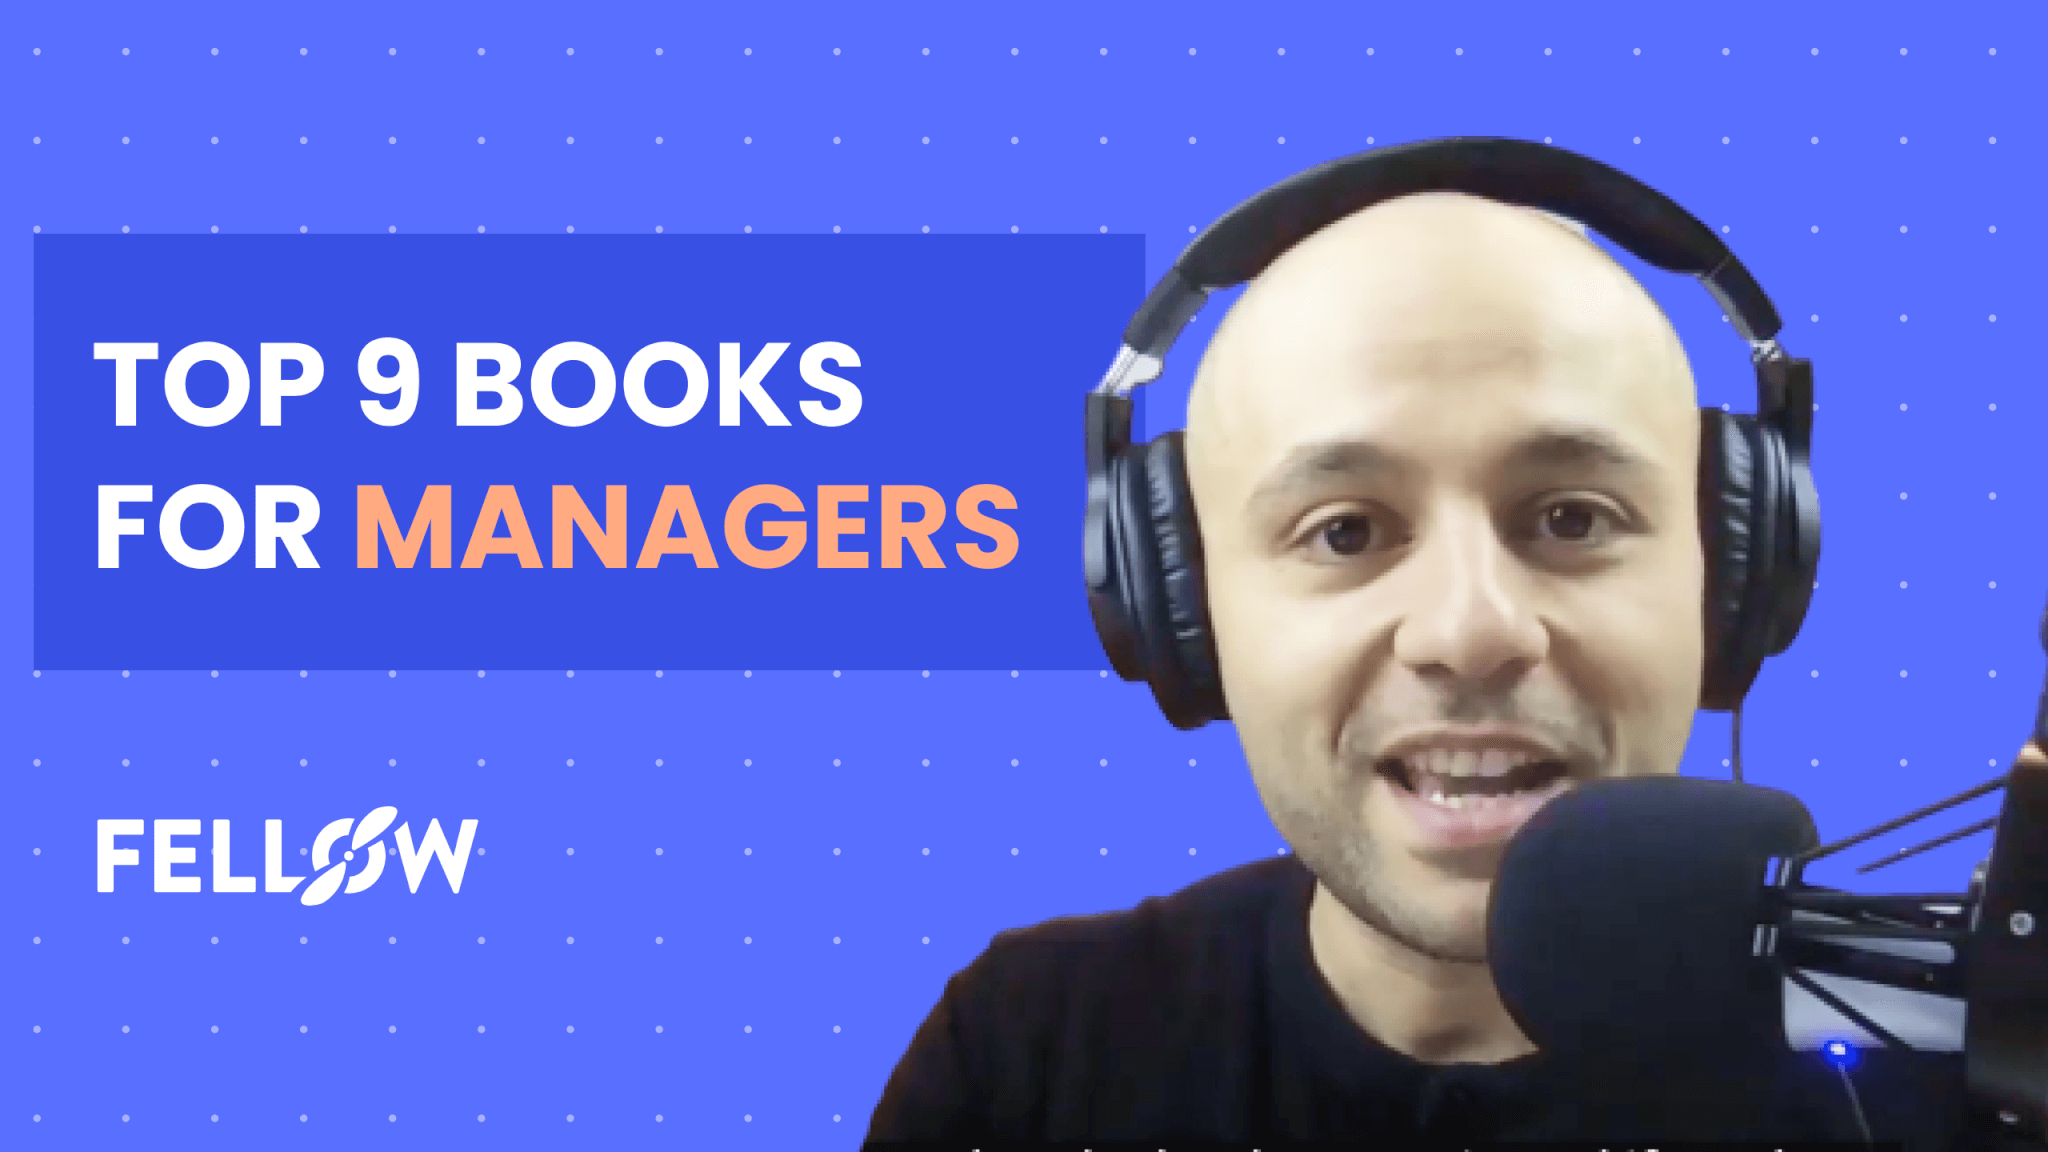 Top 9 Book Recommendations for Managers and Leaders